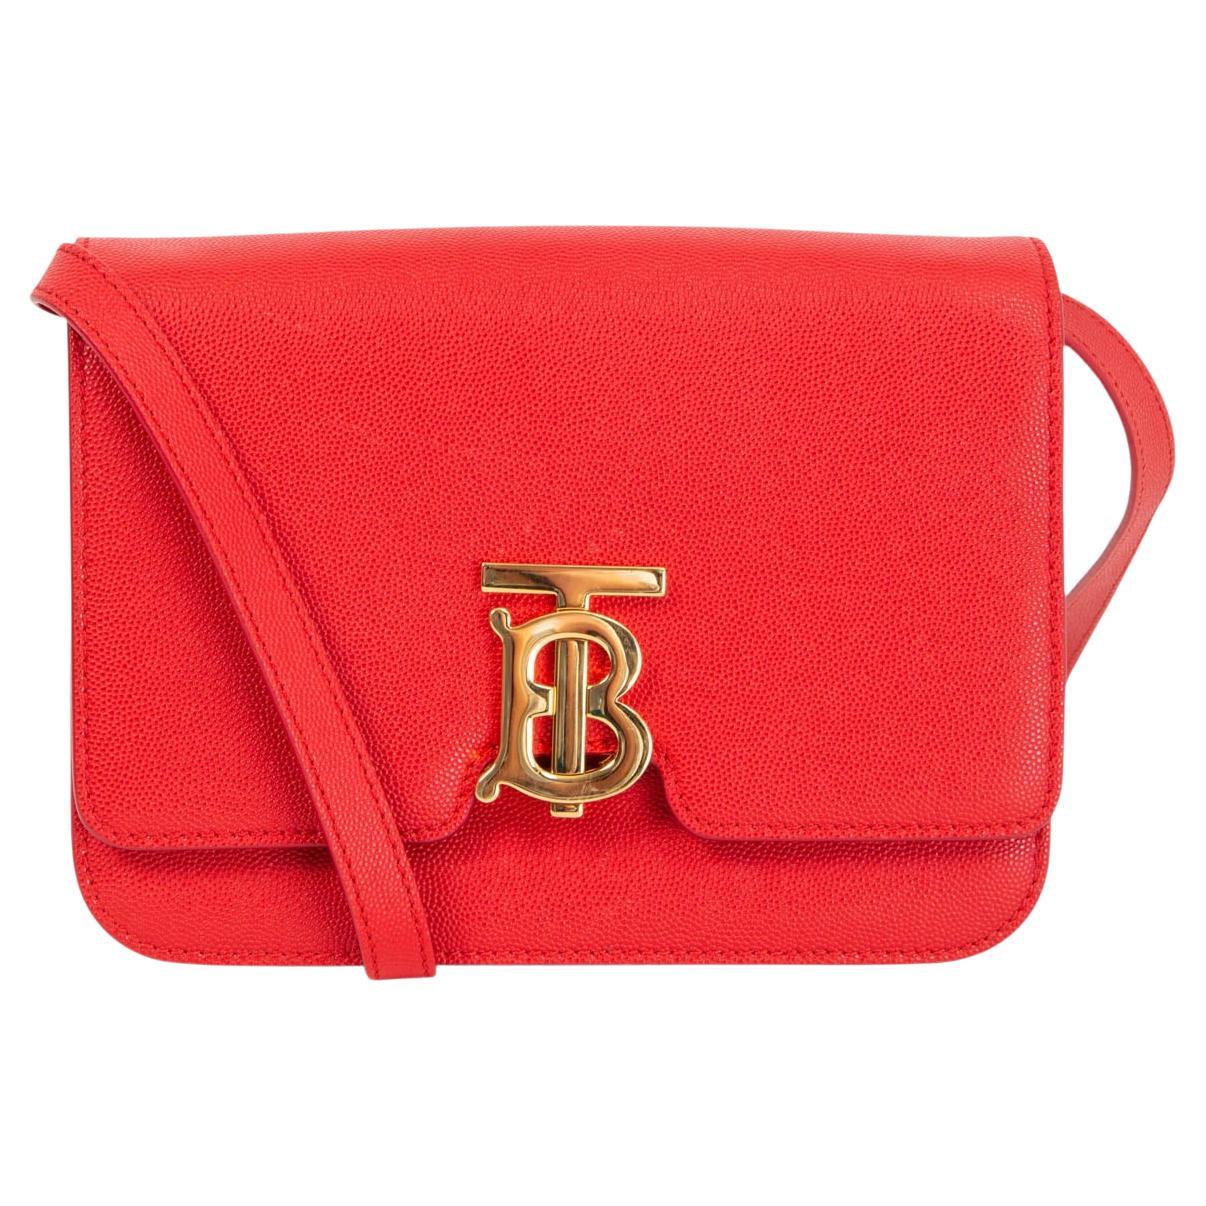 BURBERRY red grainy leather TB SMALL Shoulder Bag